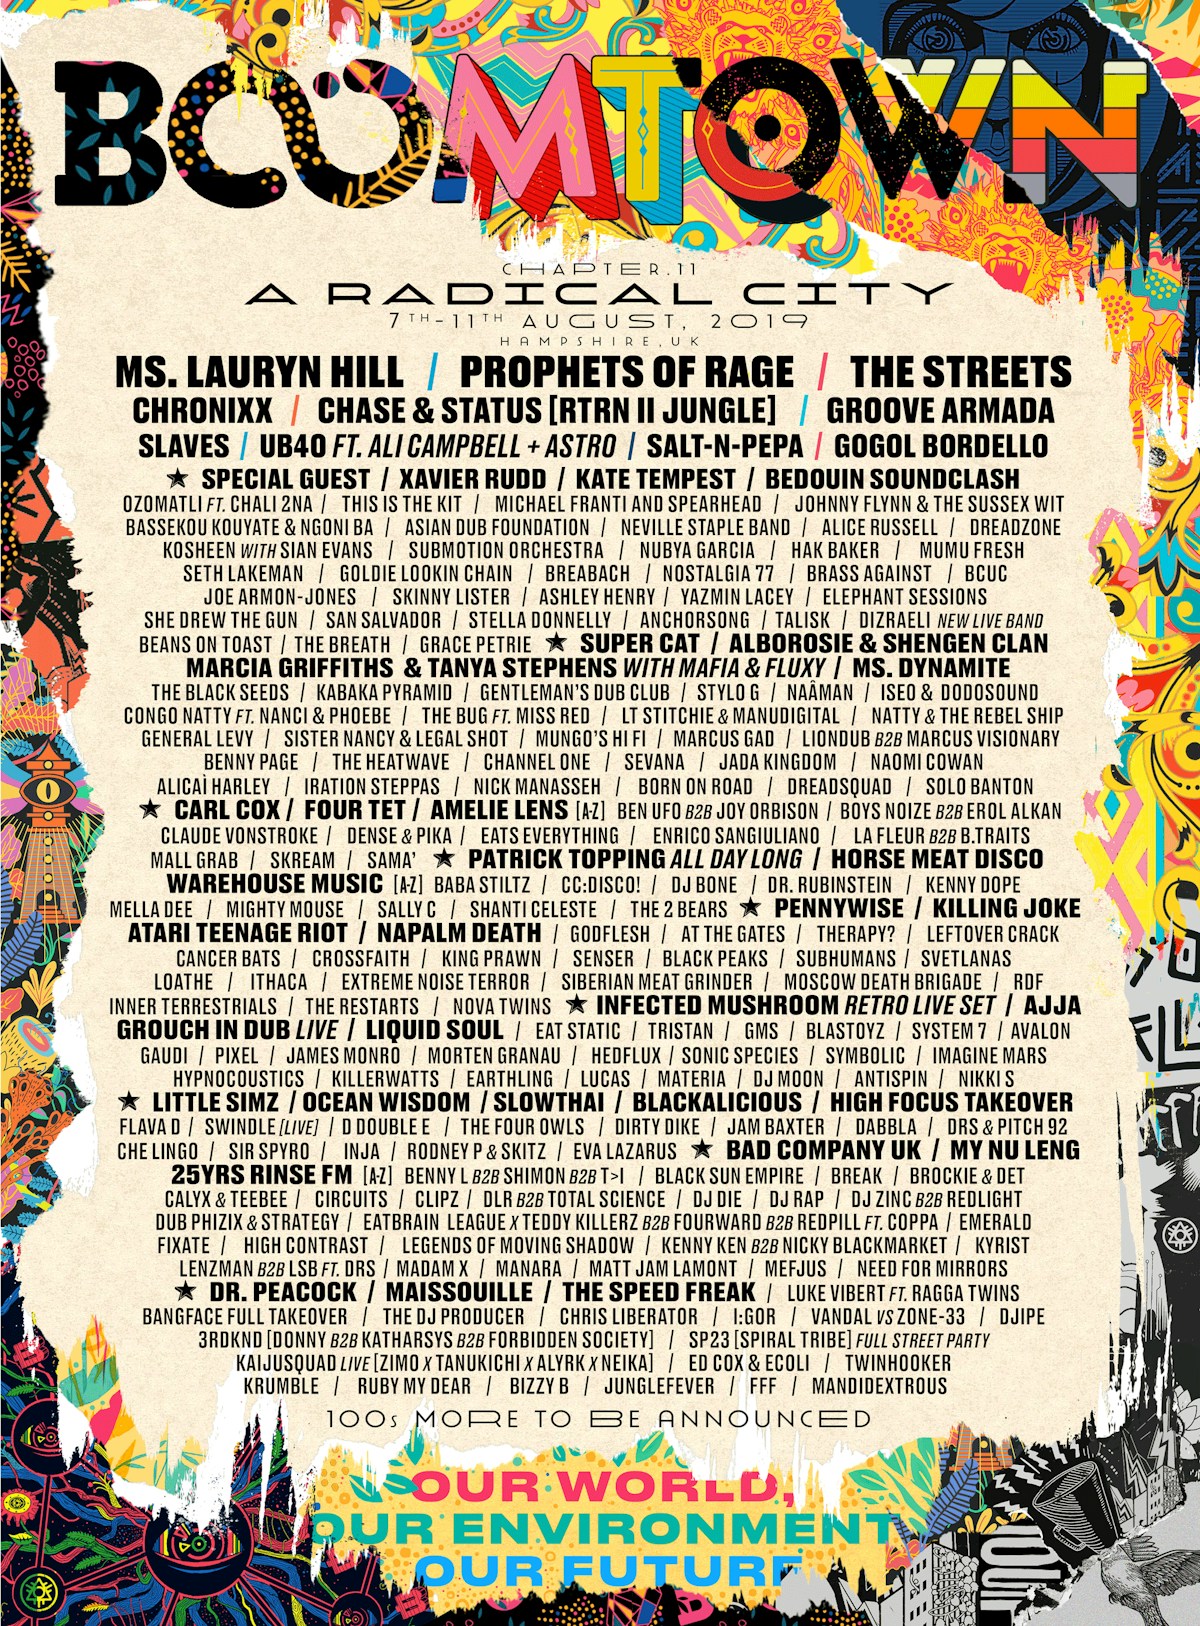 Boomtown Chapter 11 lineup has landed! Chapter Three Revolution of